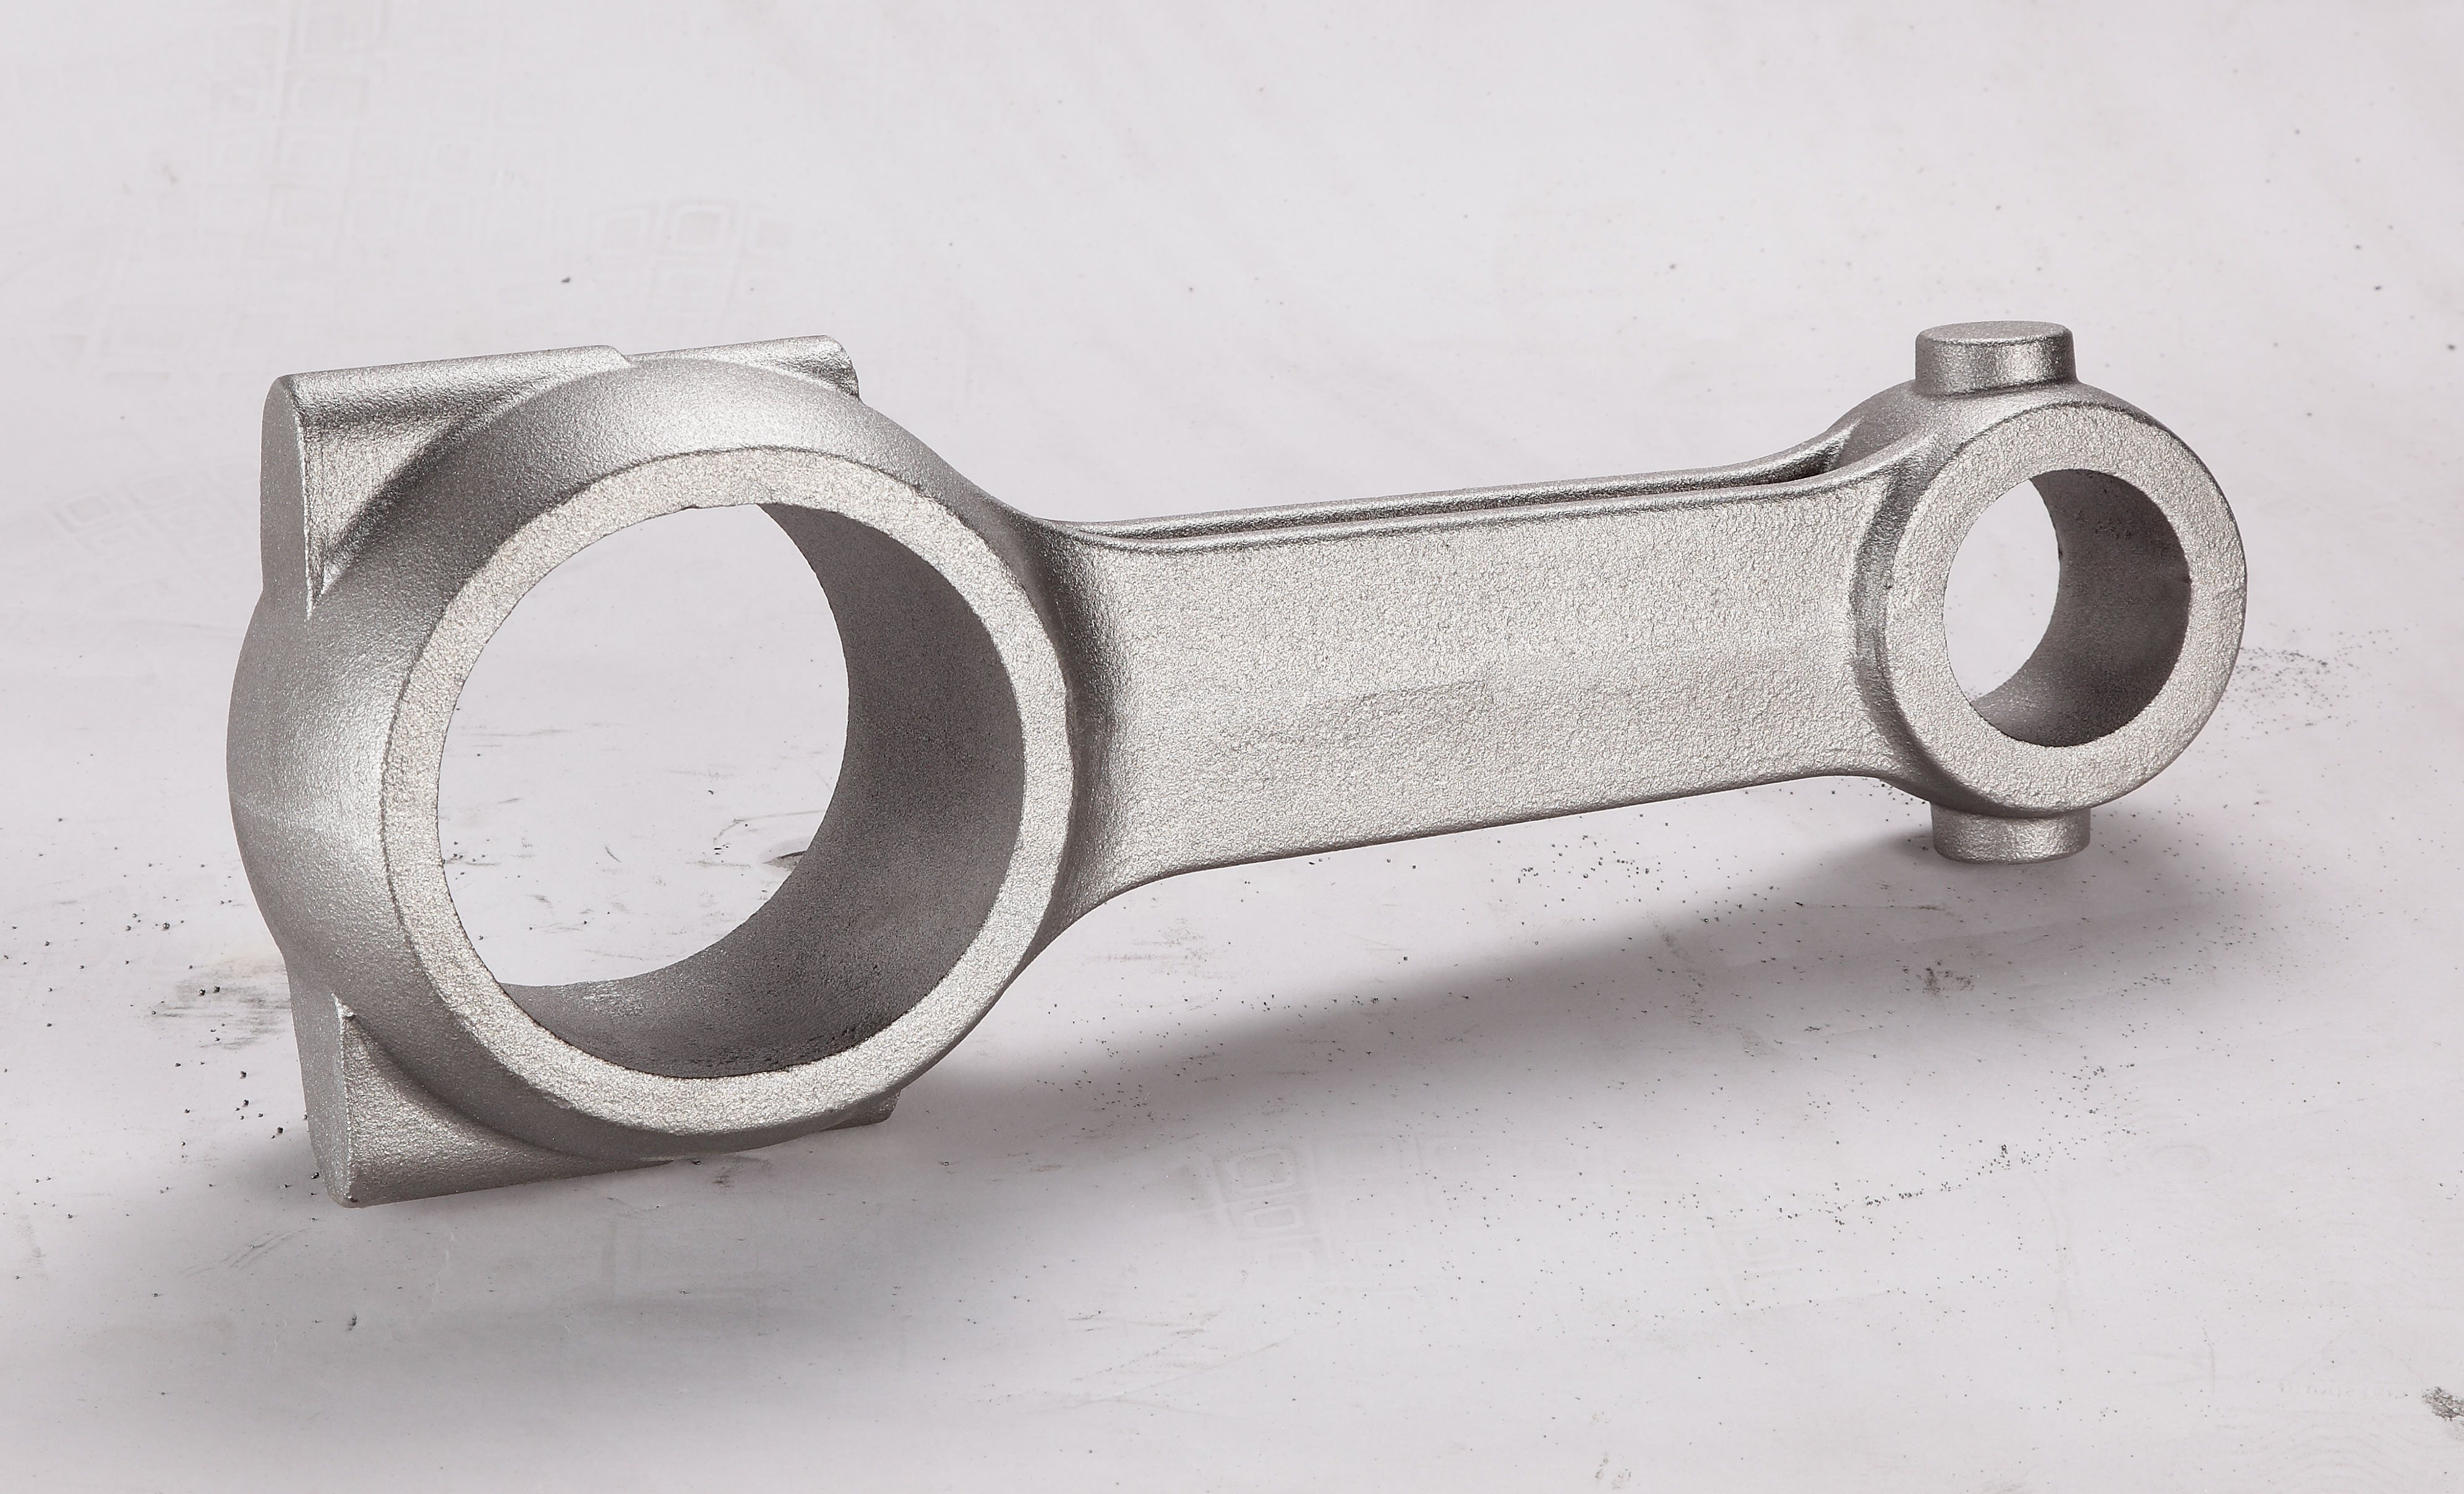 Connecting Rod For Boat